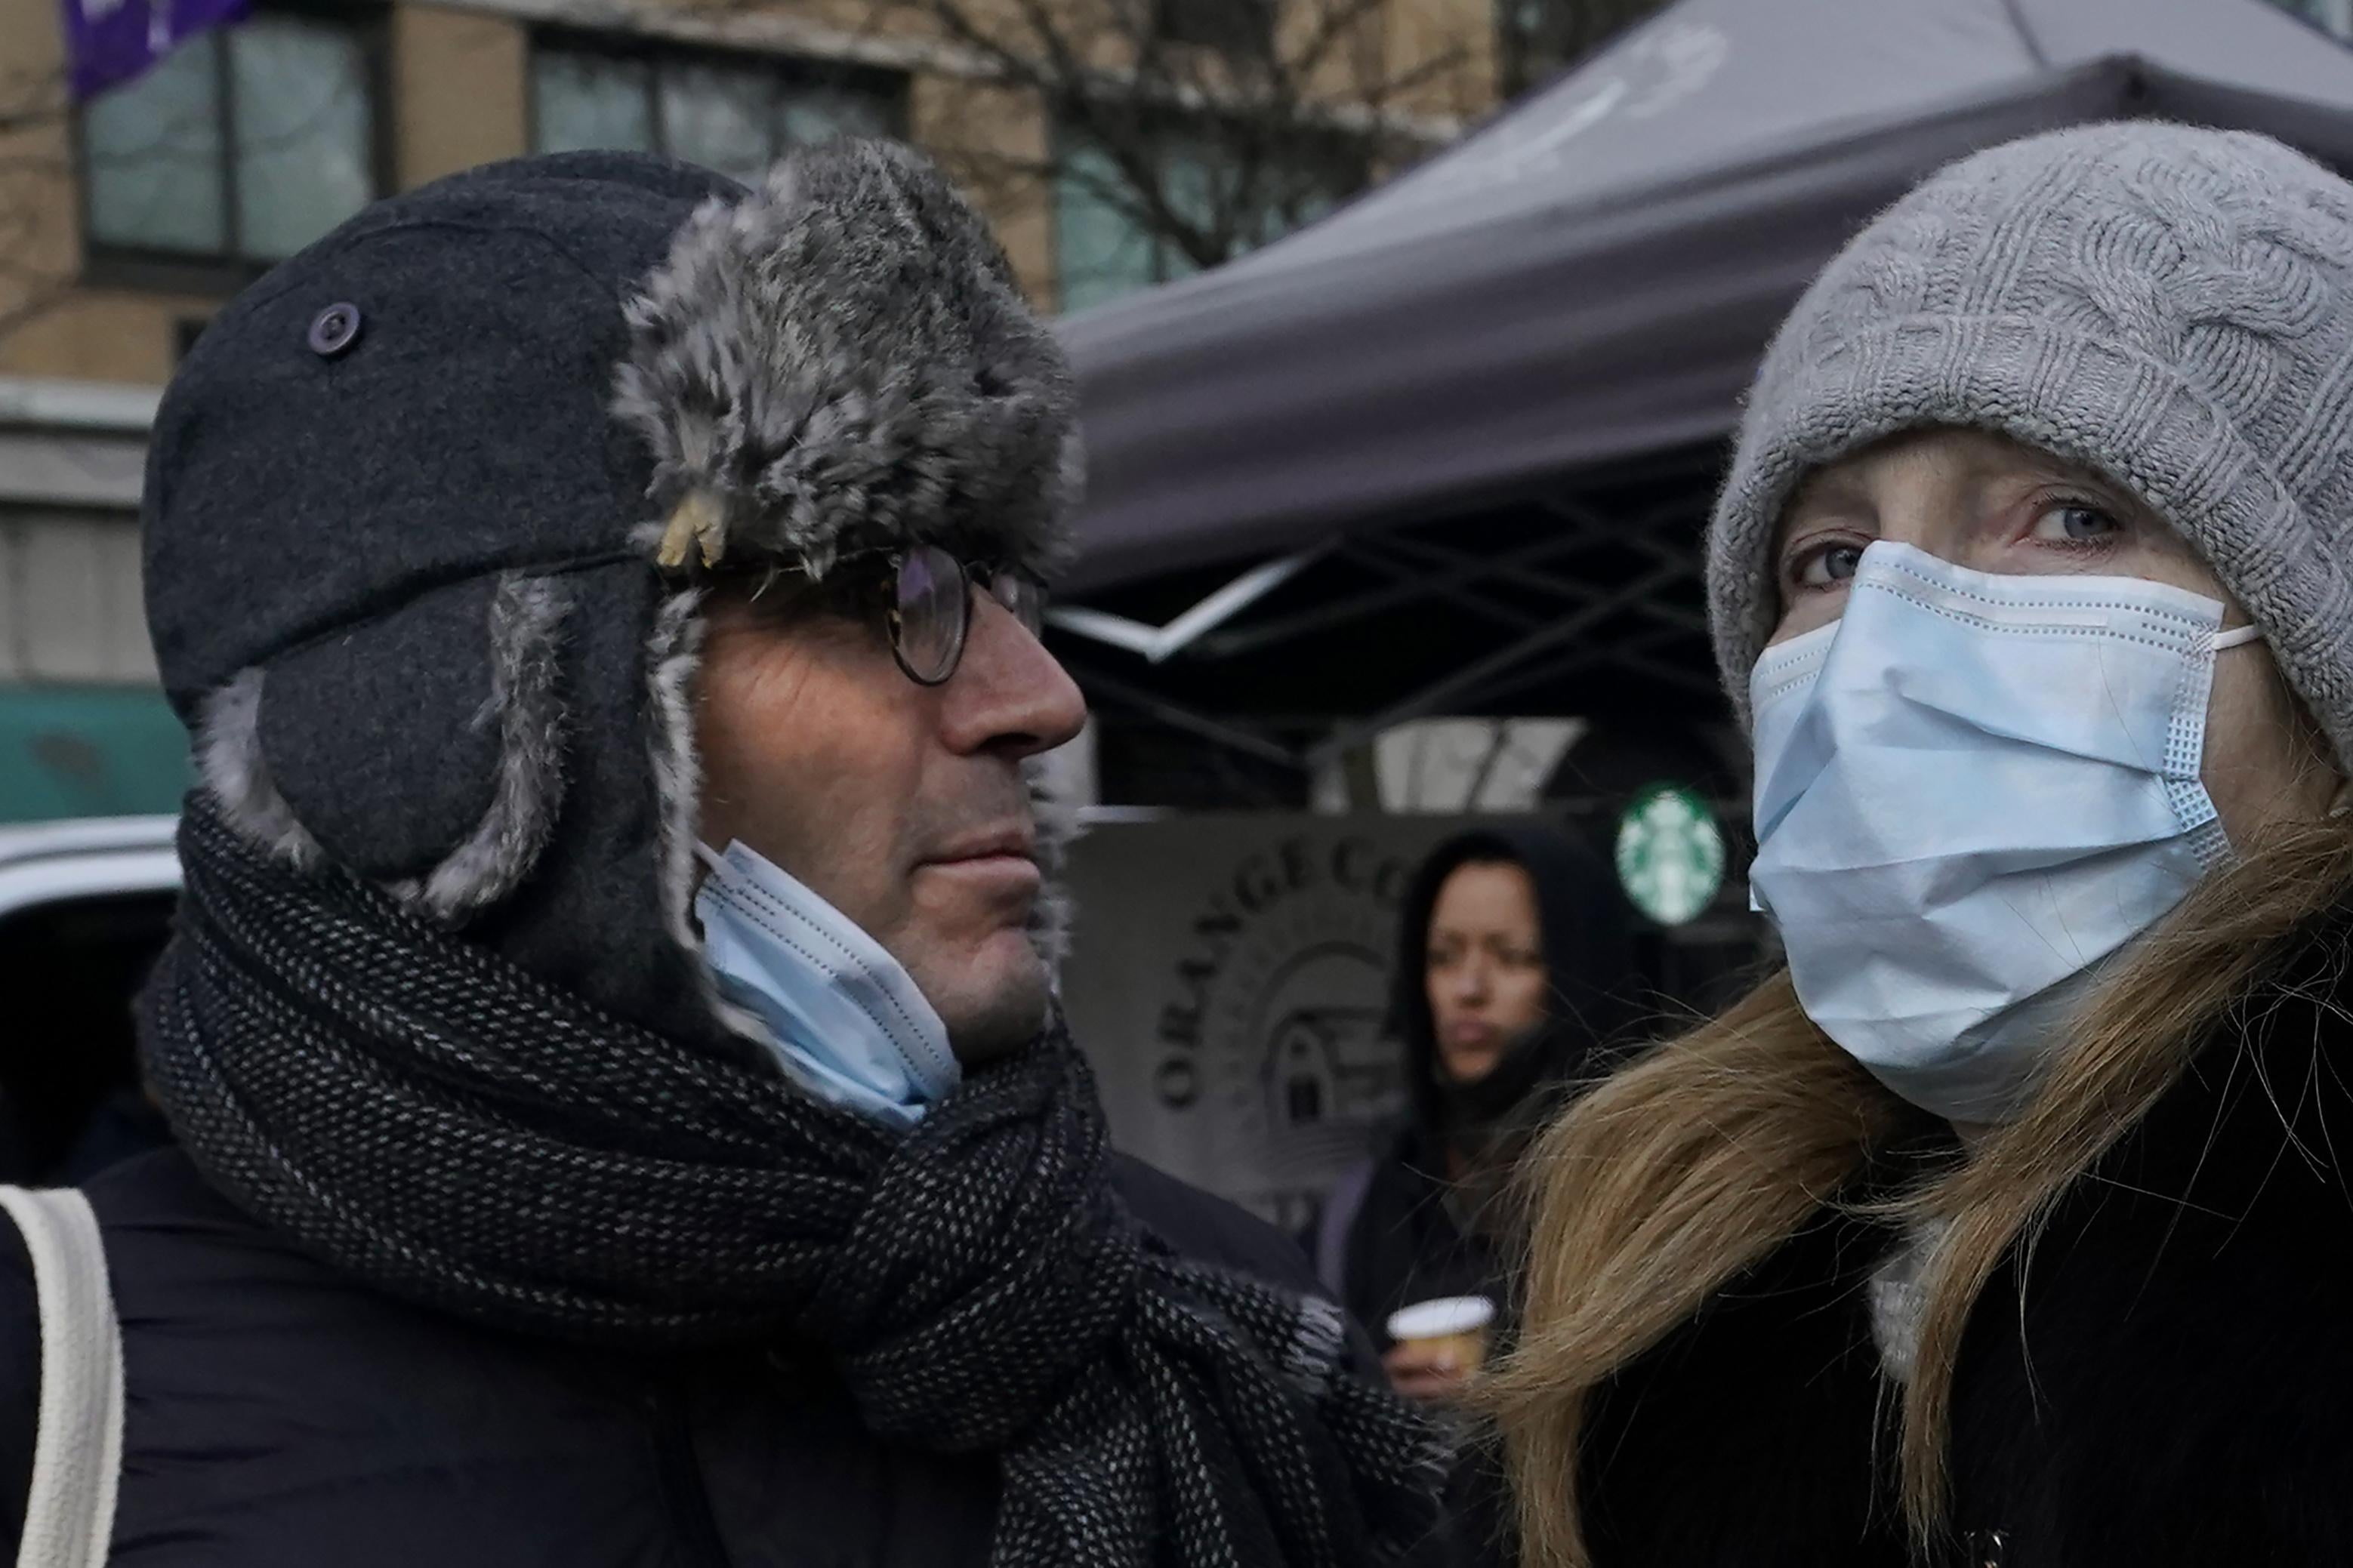 Tourists wearing masks  walk through Union Square in New York City on February 28, 2020, amid fears of the coronavirus and a global pandemic. - The World Health Organization raised its global risk assessment of the new coronavirus to its highest level after the epidemic spread to sub-Saharan Africa and caused financial markets to plunge. (Photo by TIMOTHY A. CLARY / AFP) (Photo by TIMOTHY A. CLARY/AFP via Getty Images)